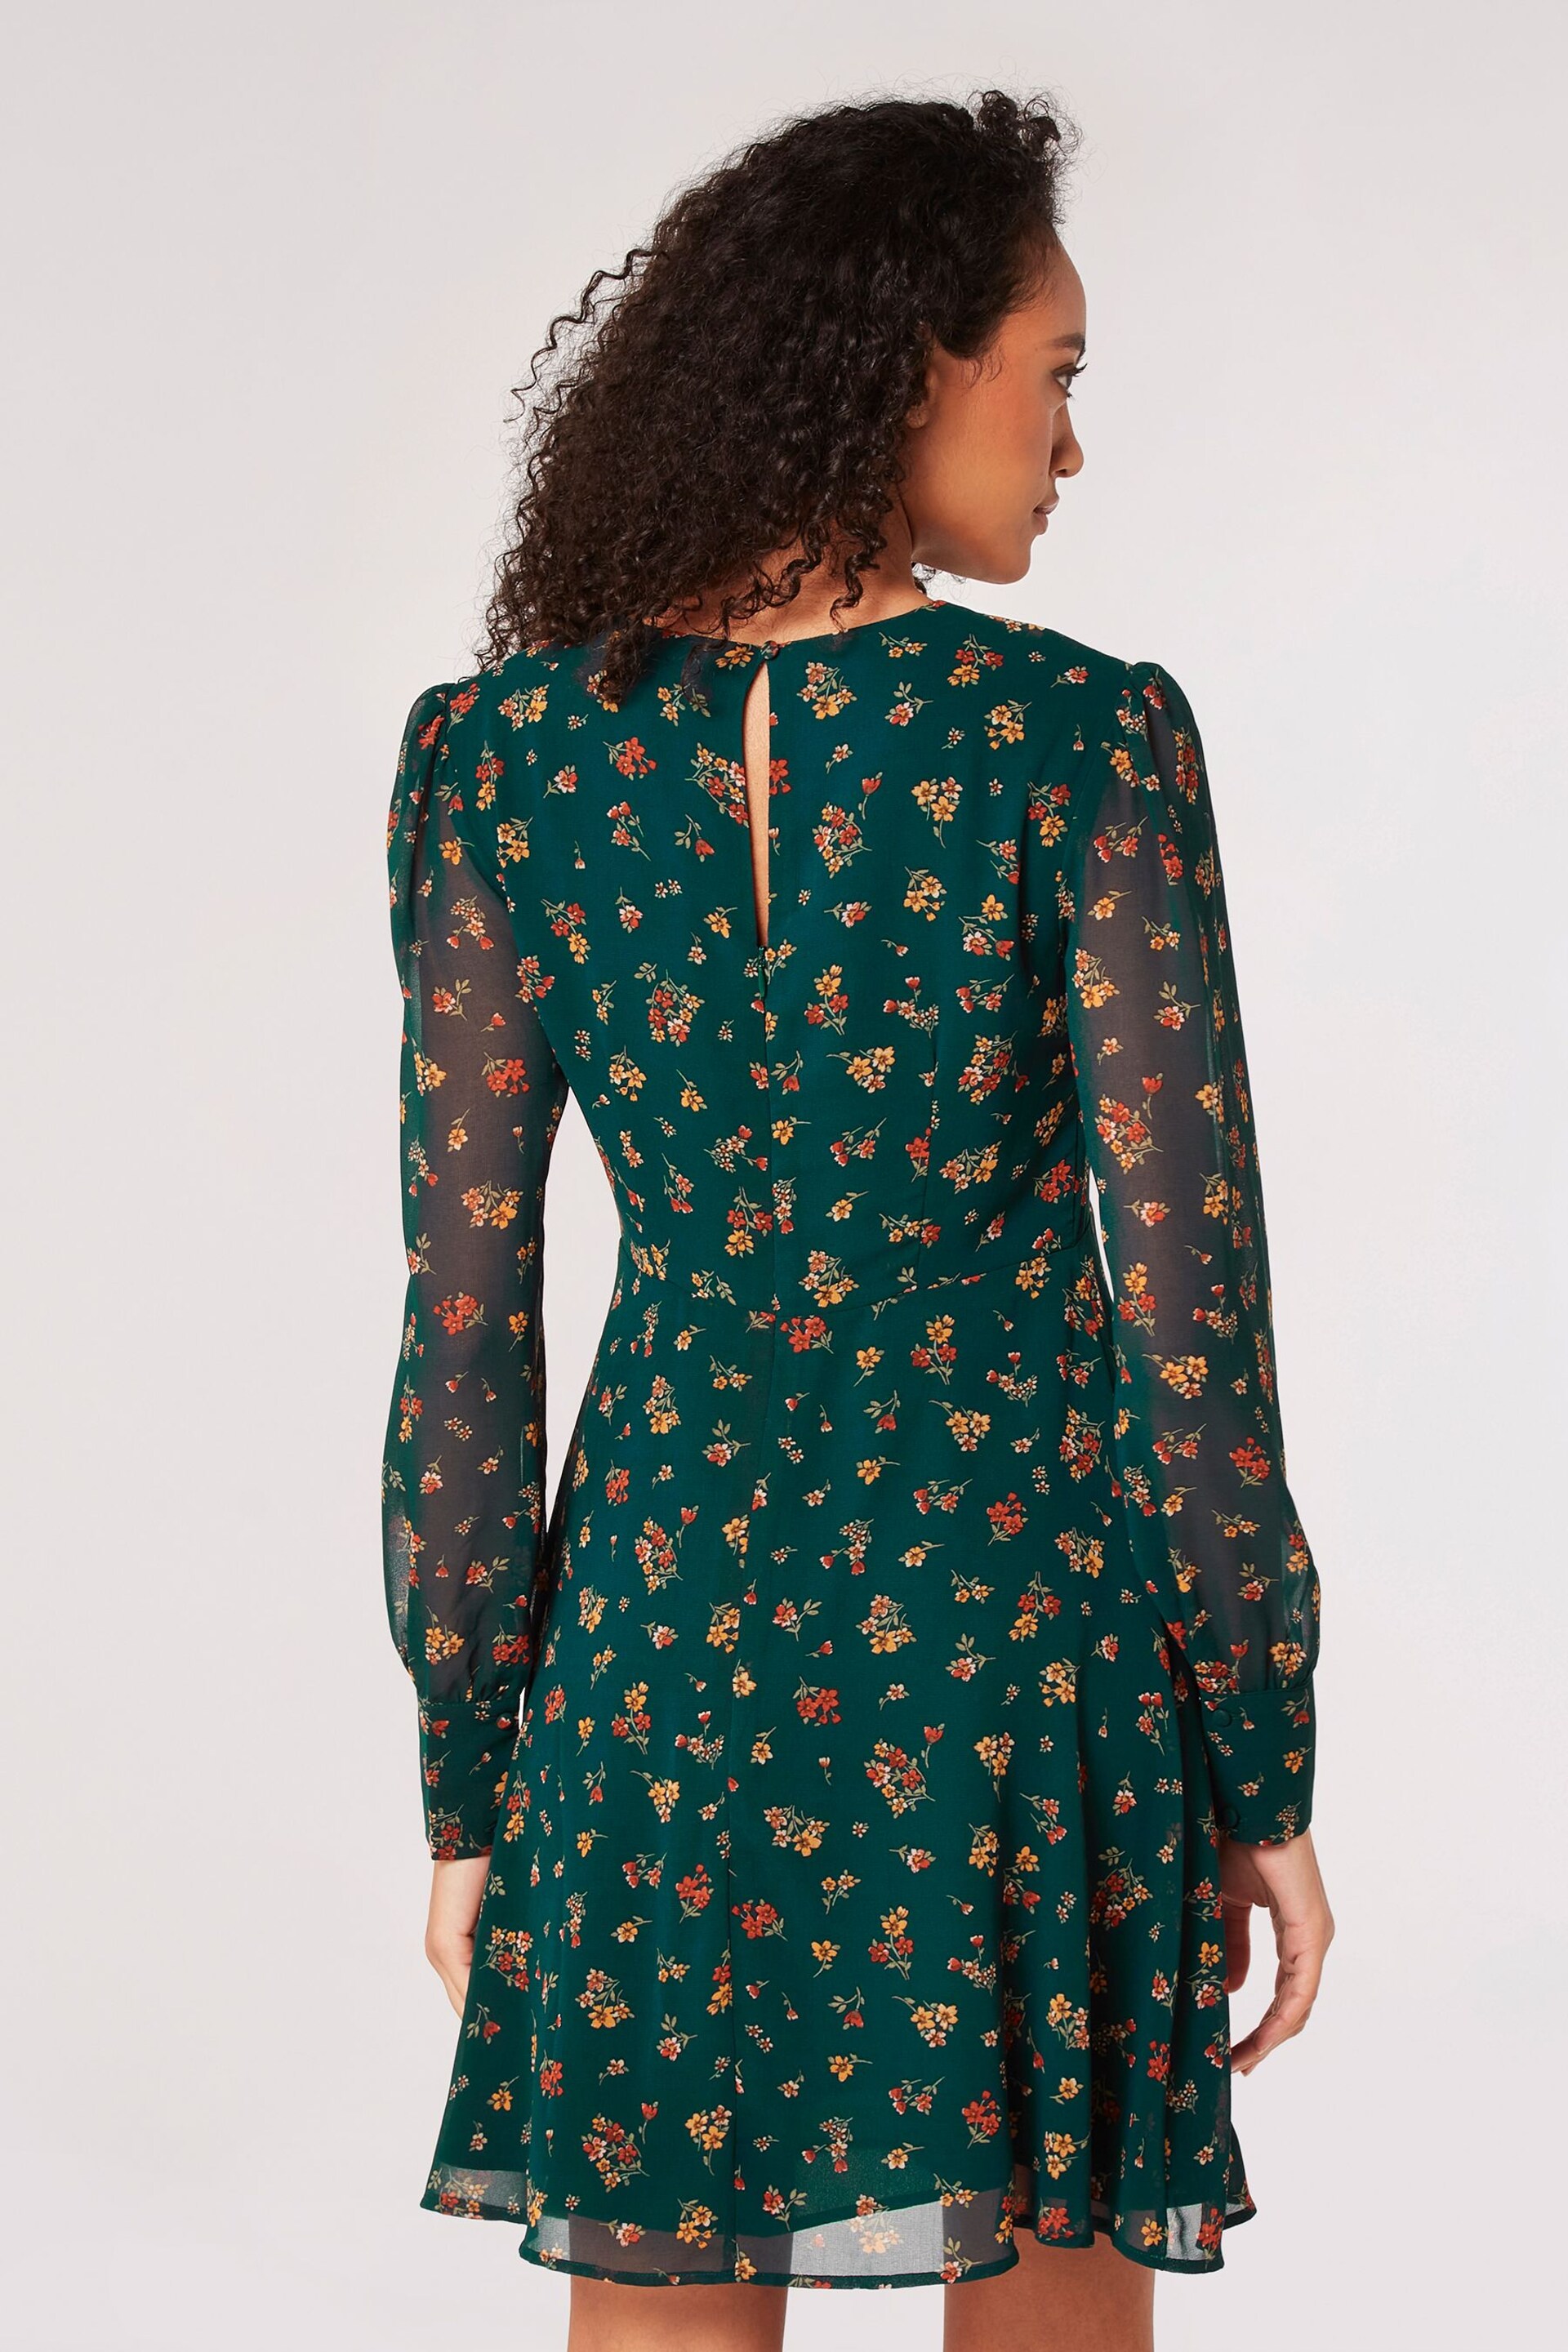 Apricot Green Ditsy Bunches Empire Seam Dress - Image 2 of 4